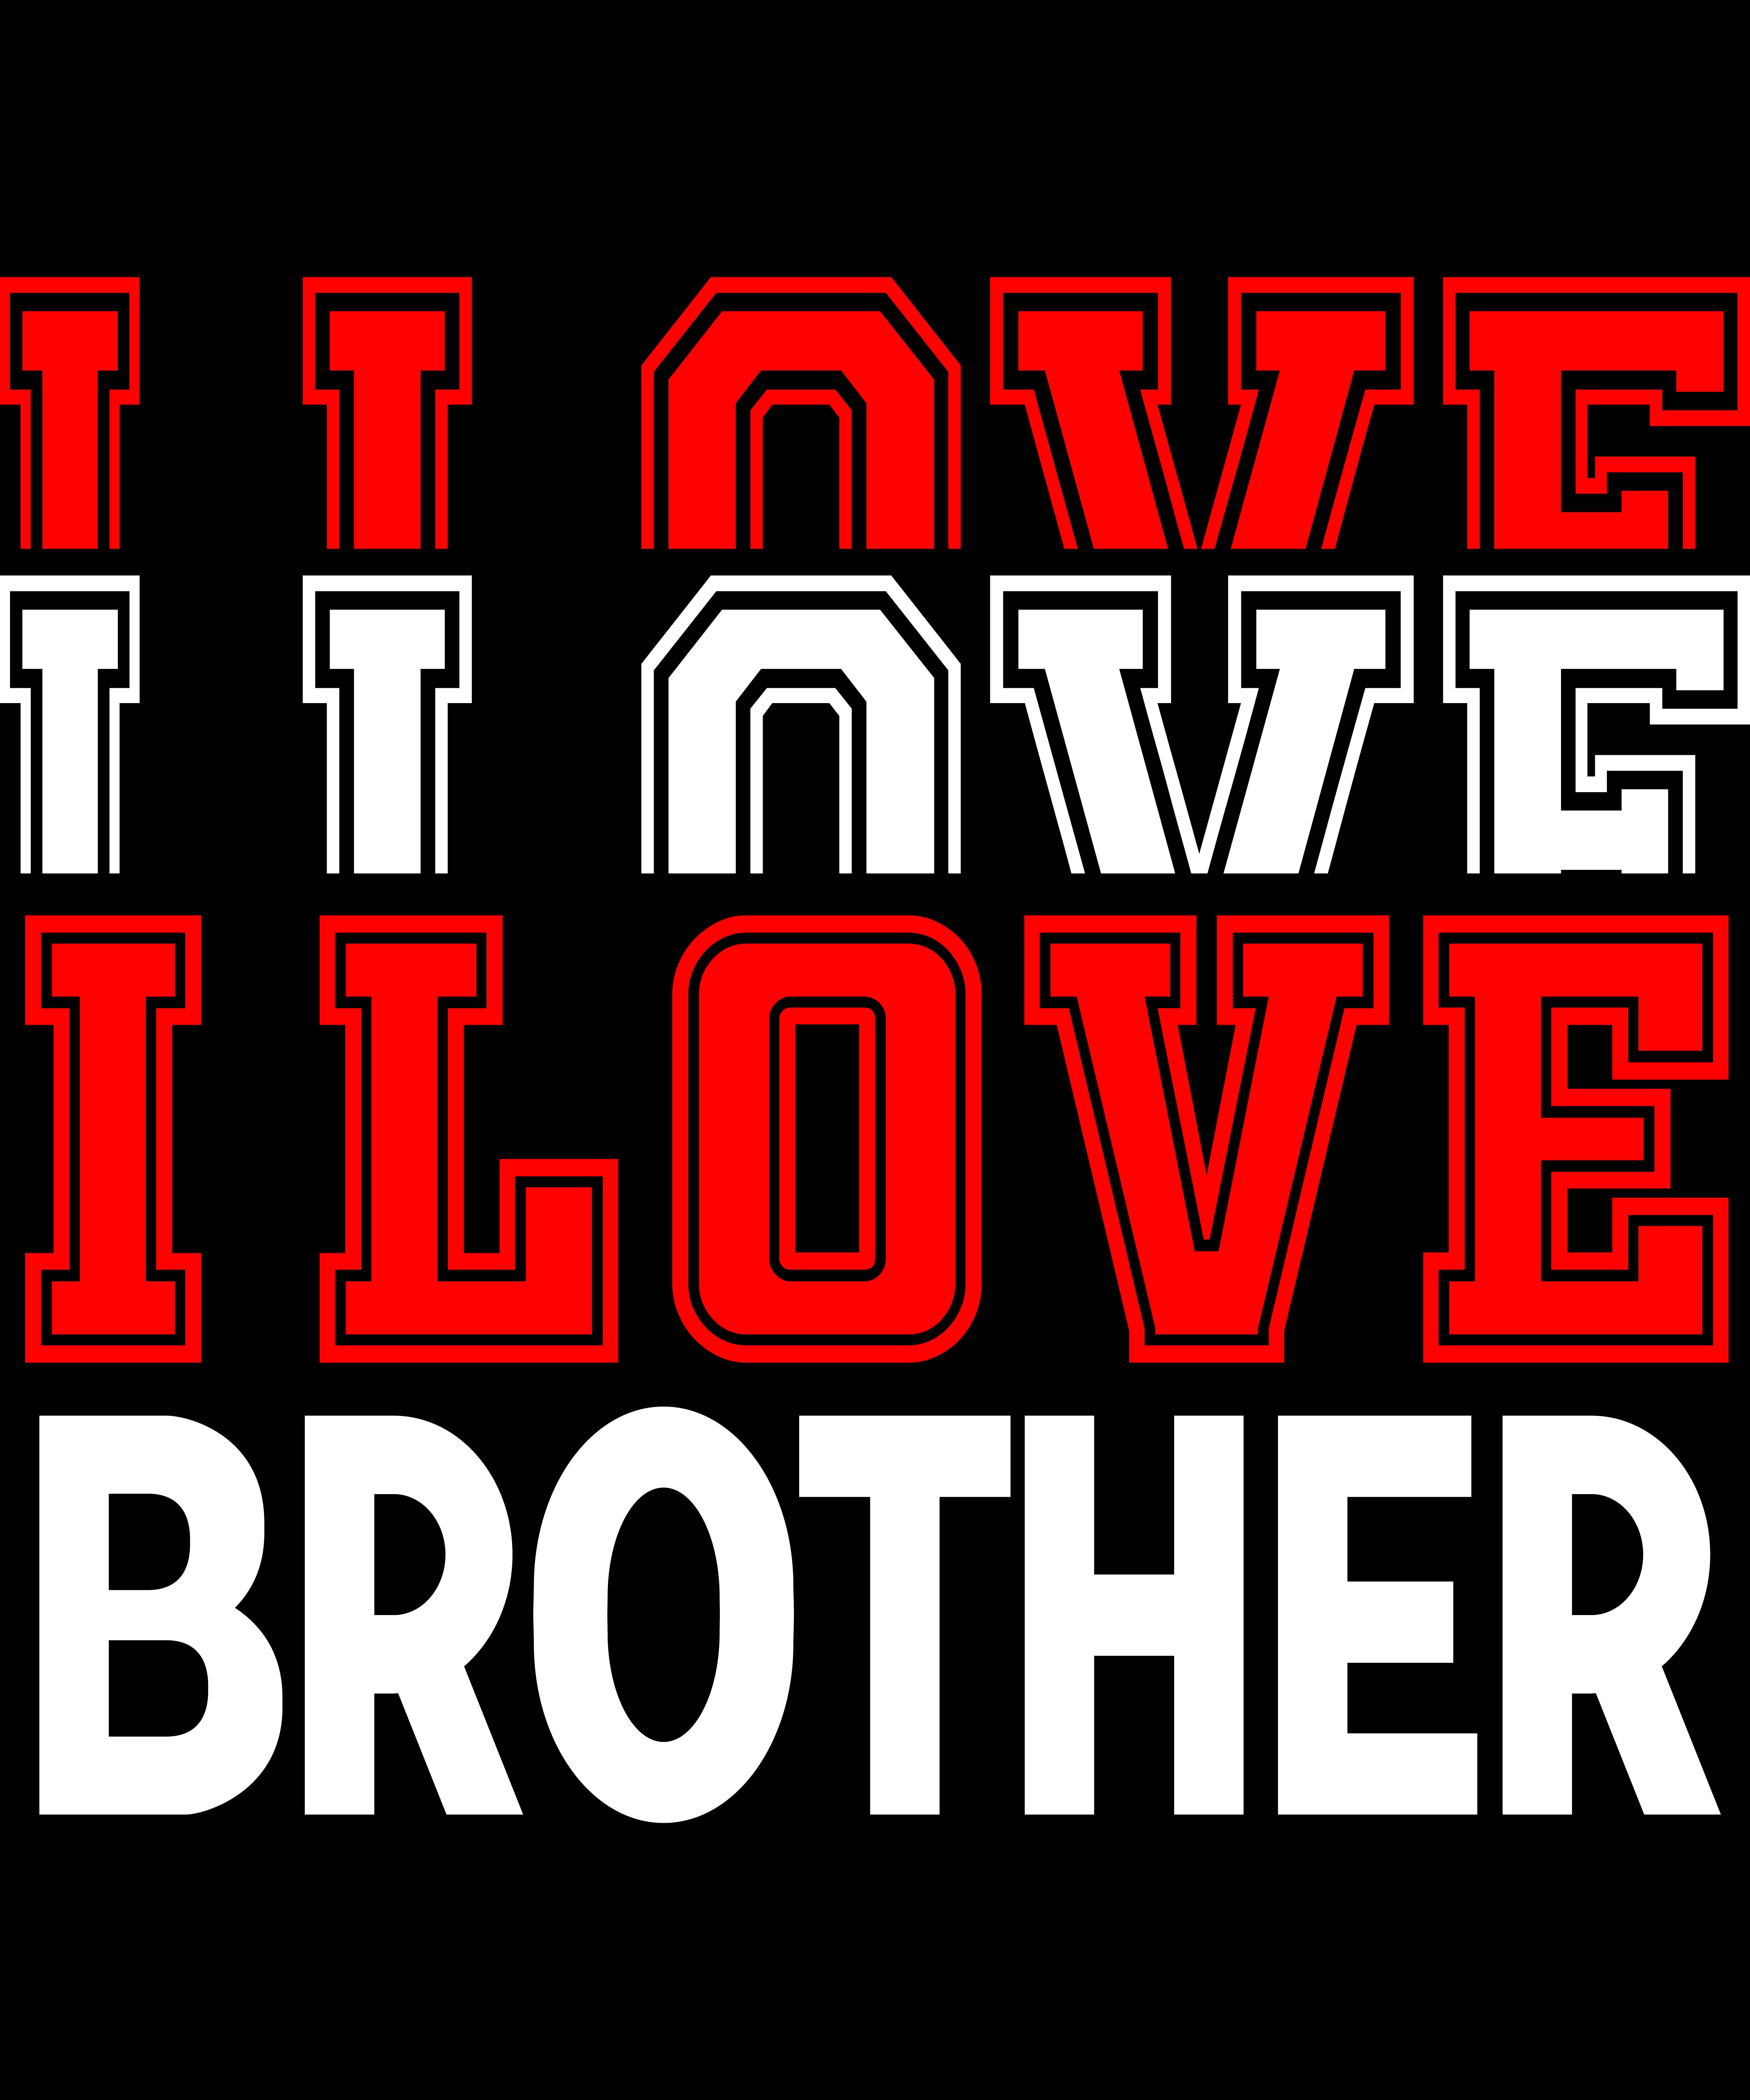 I love brother - quote for t-shirt design.